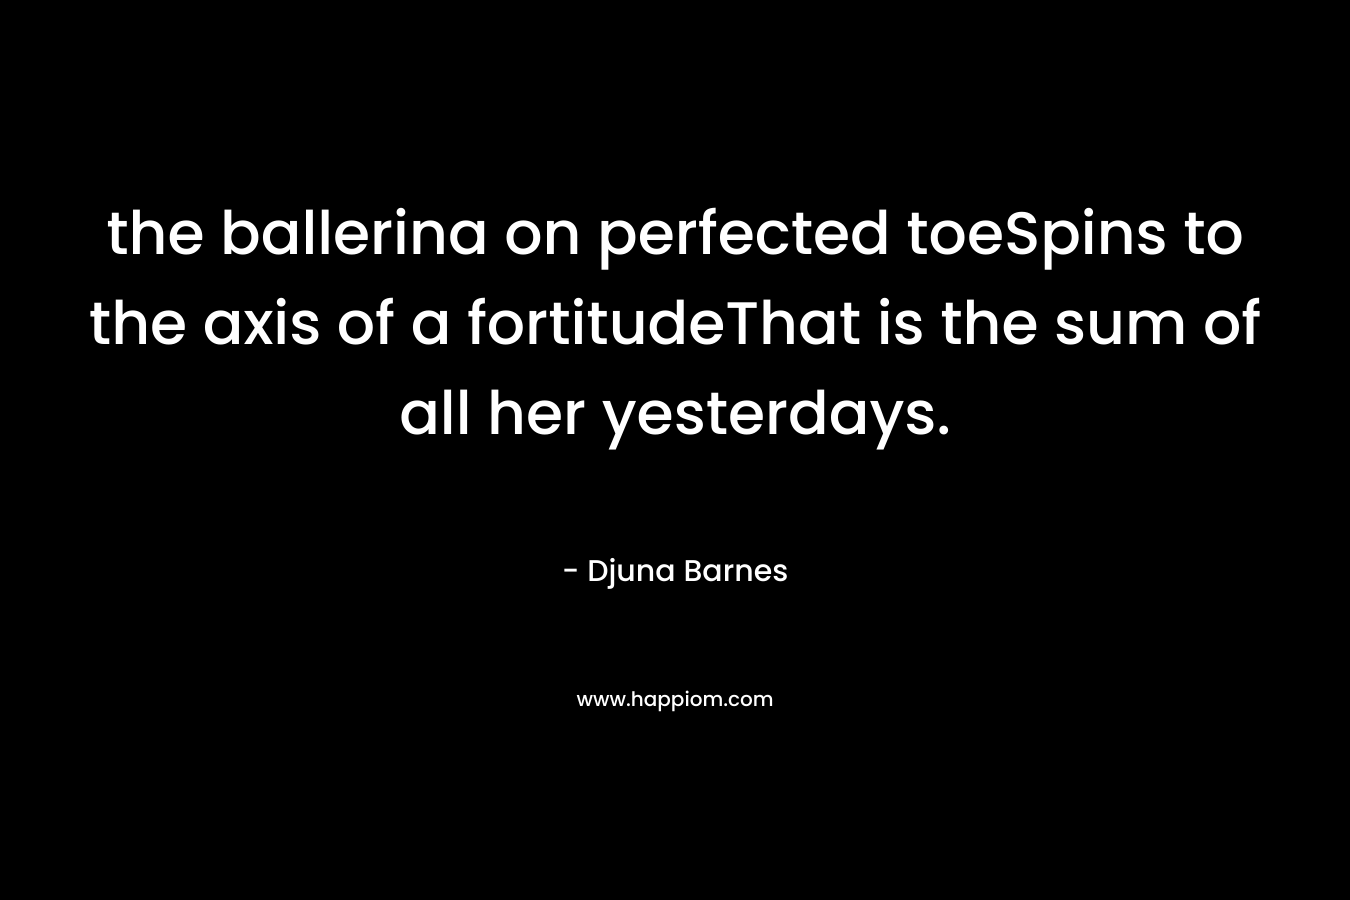 the ballerina on perfected toeSpins to the axis of a fortitudeThat is the sum of all her yesterdays. – Djuna Barnes